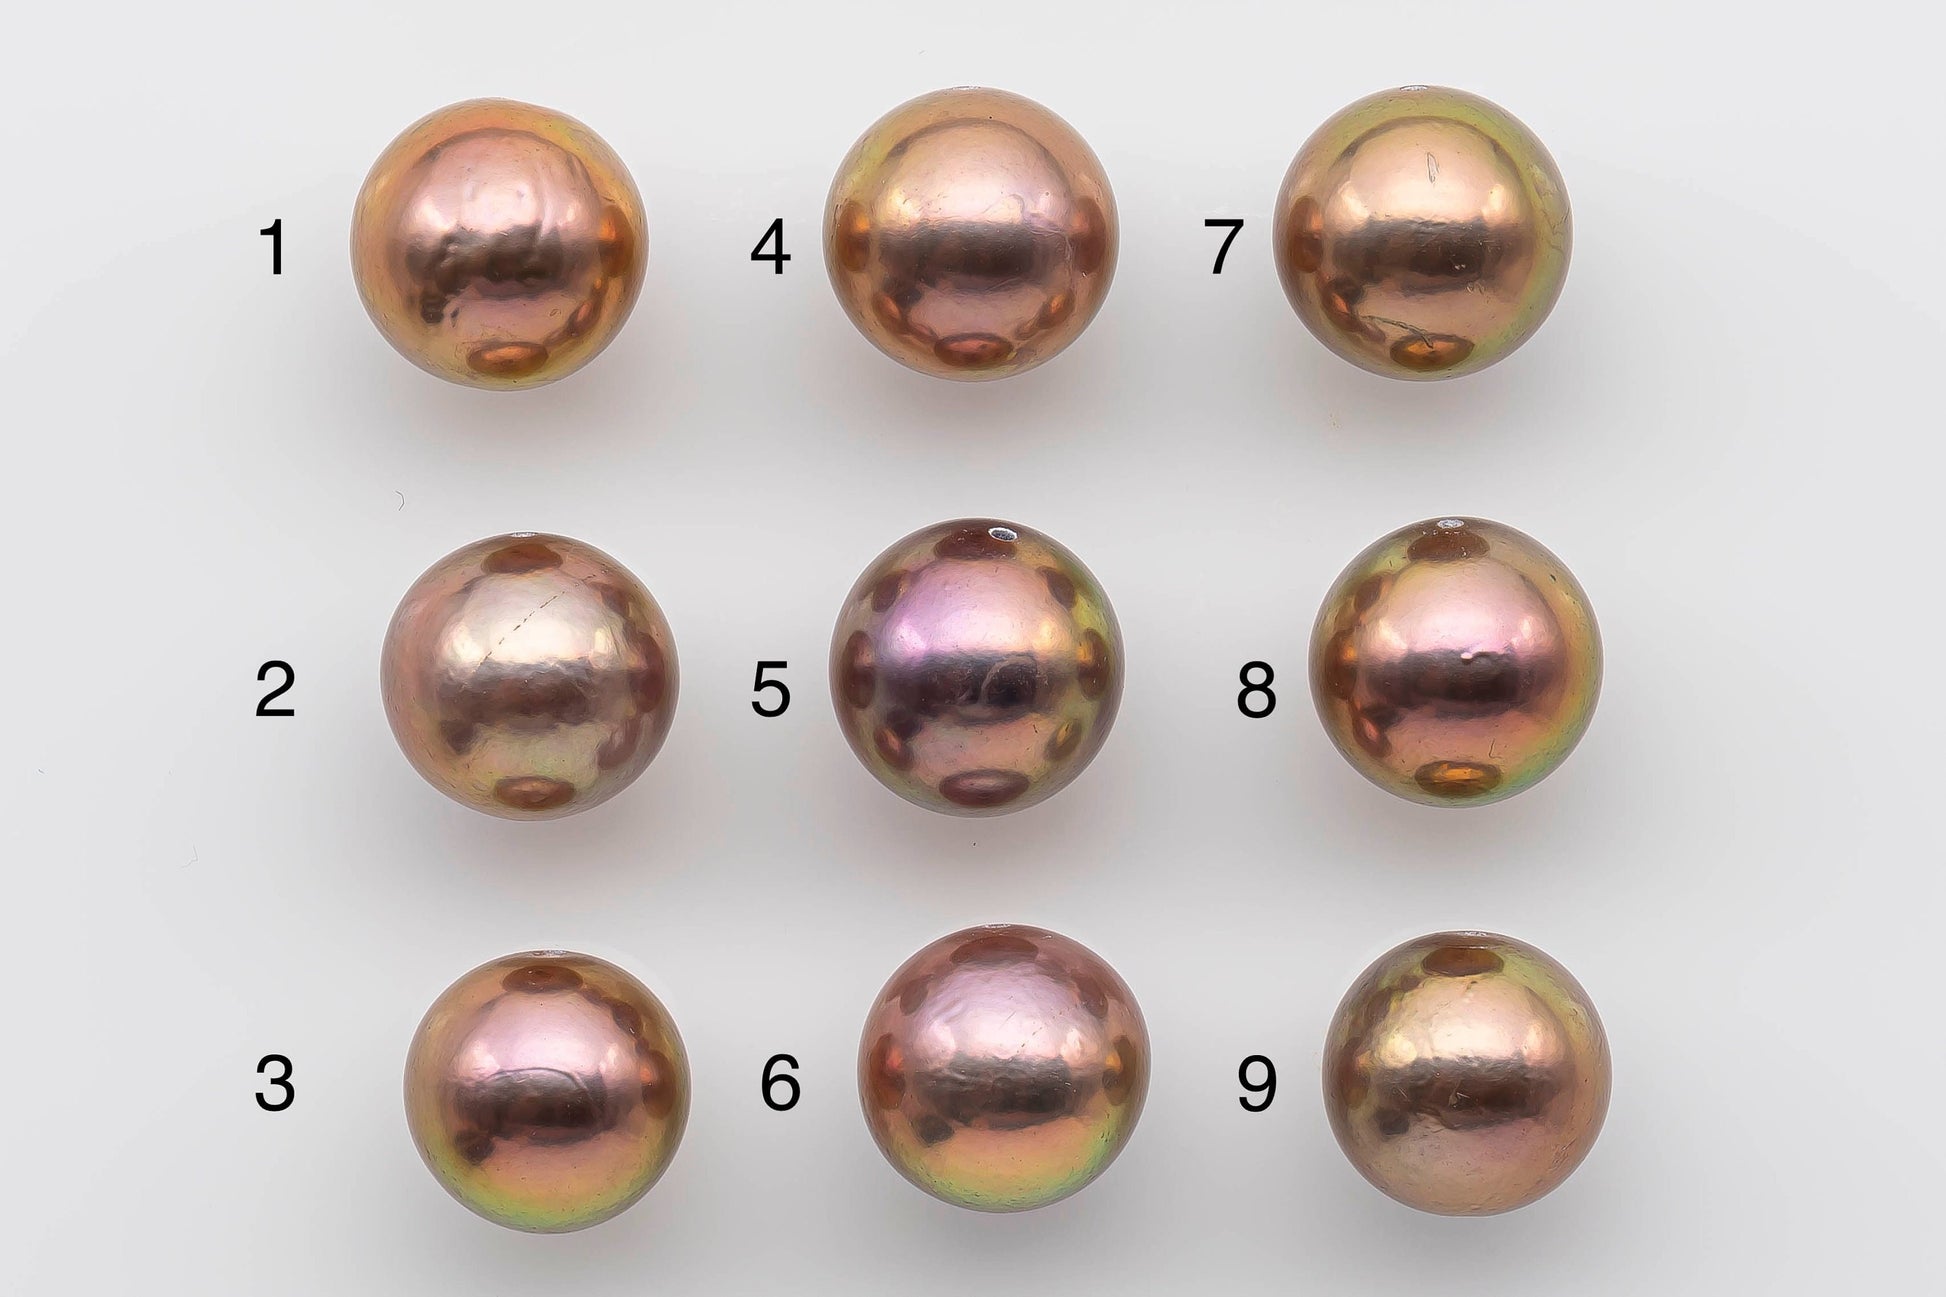 12-13mm Single Edison Pearls Full Drilled in Natural Color